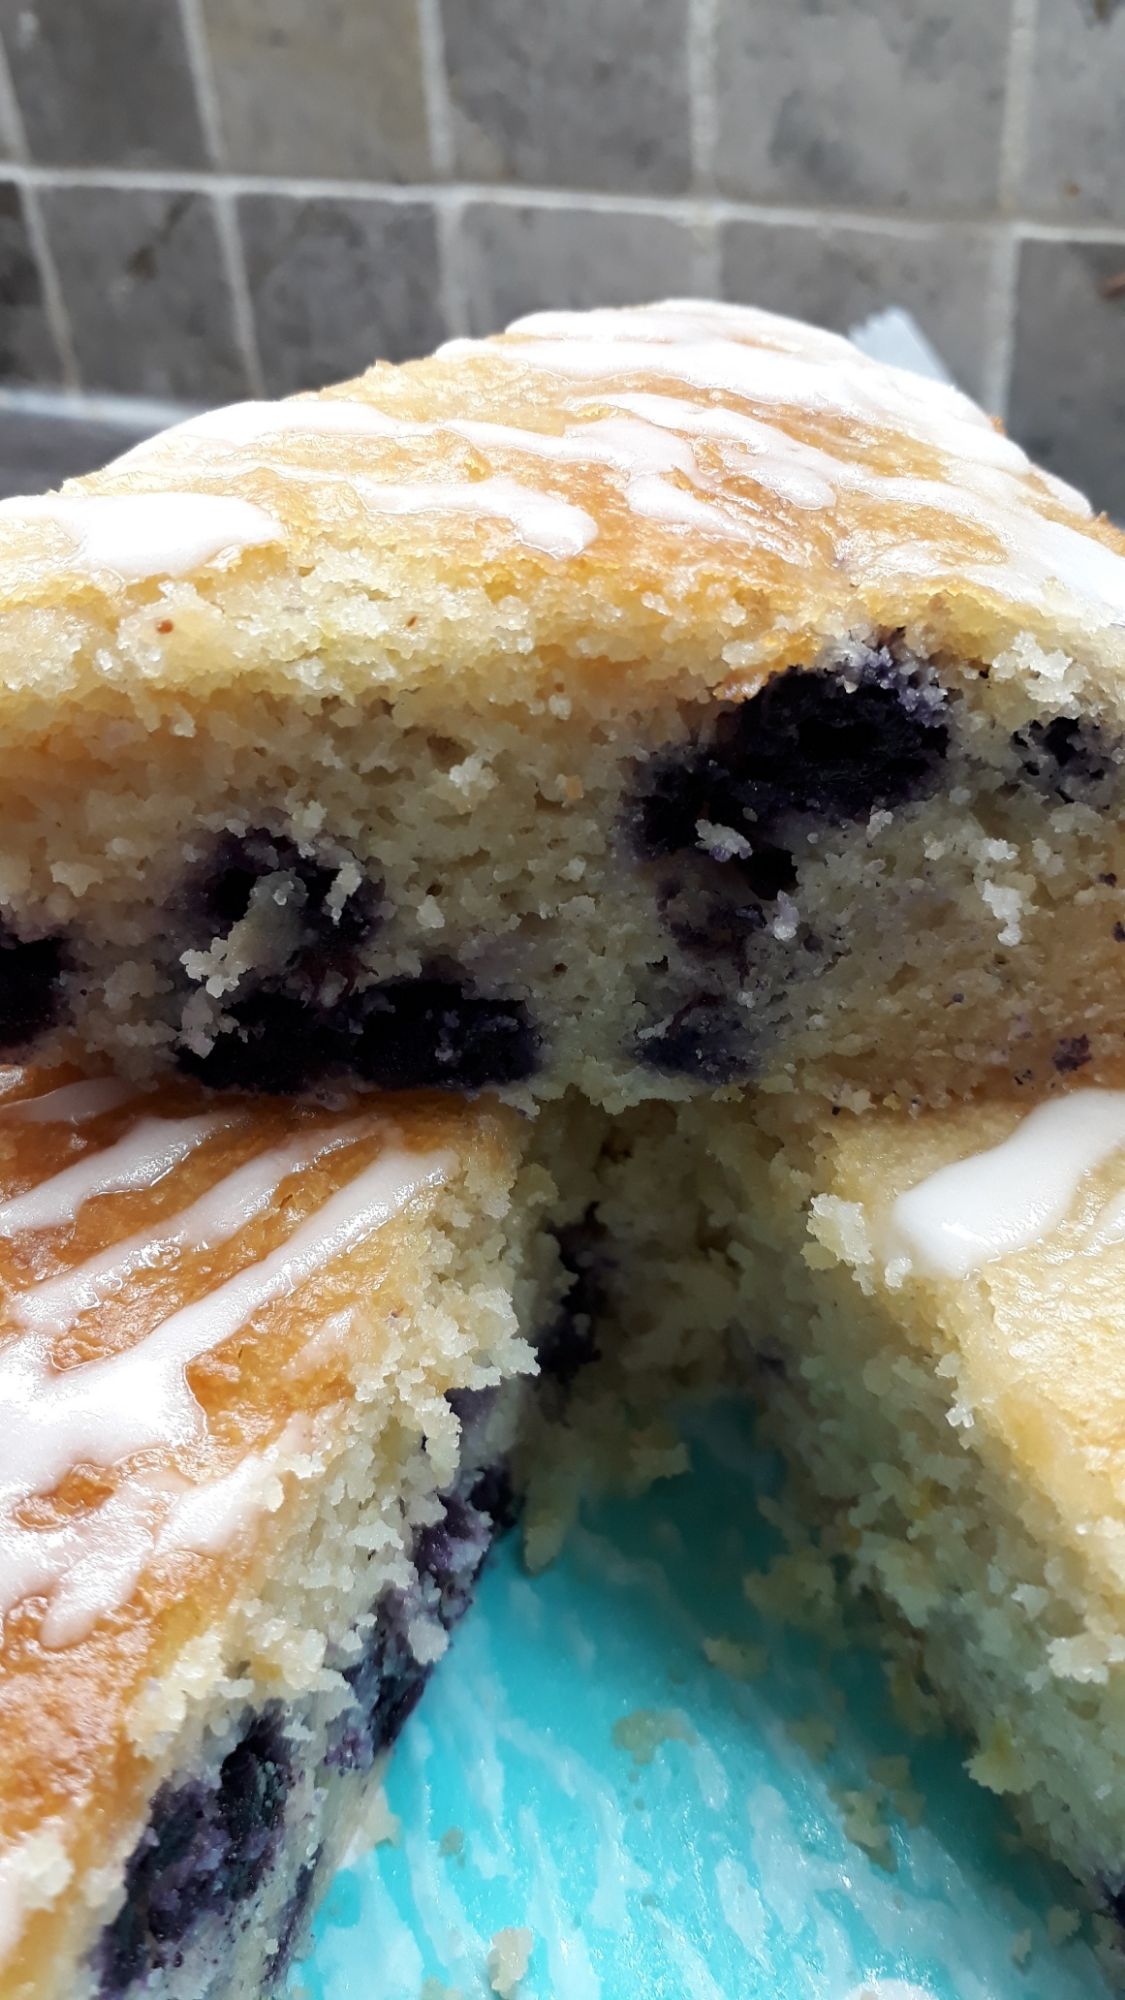 Blueberry & Lemon Cake made without gluten, eggs or dairy